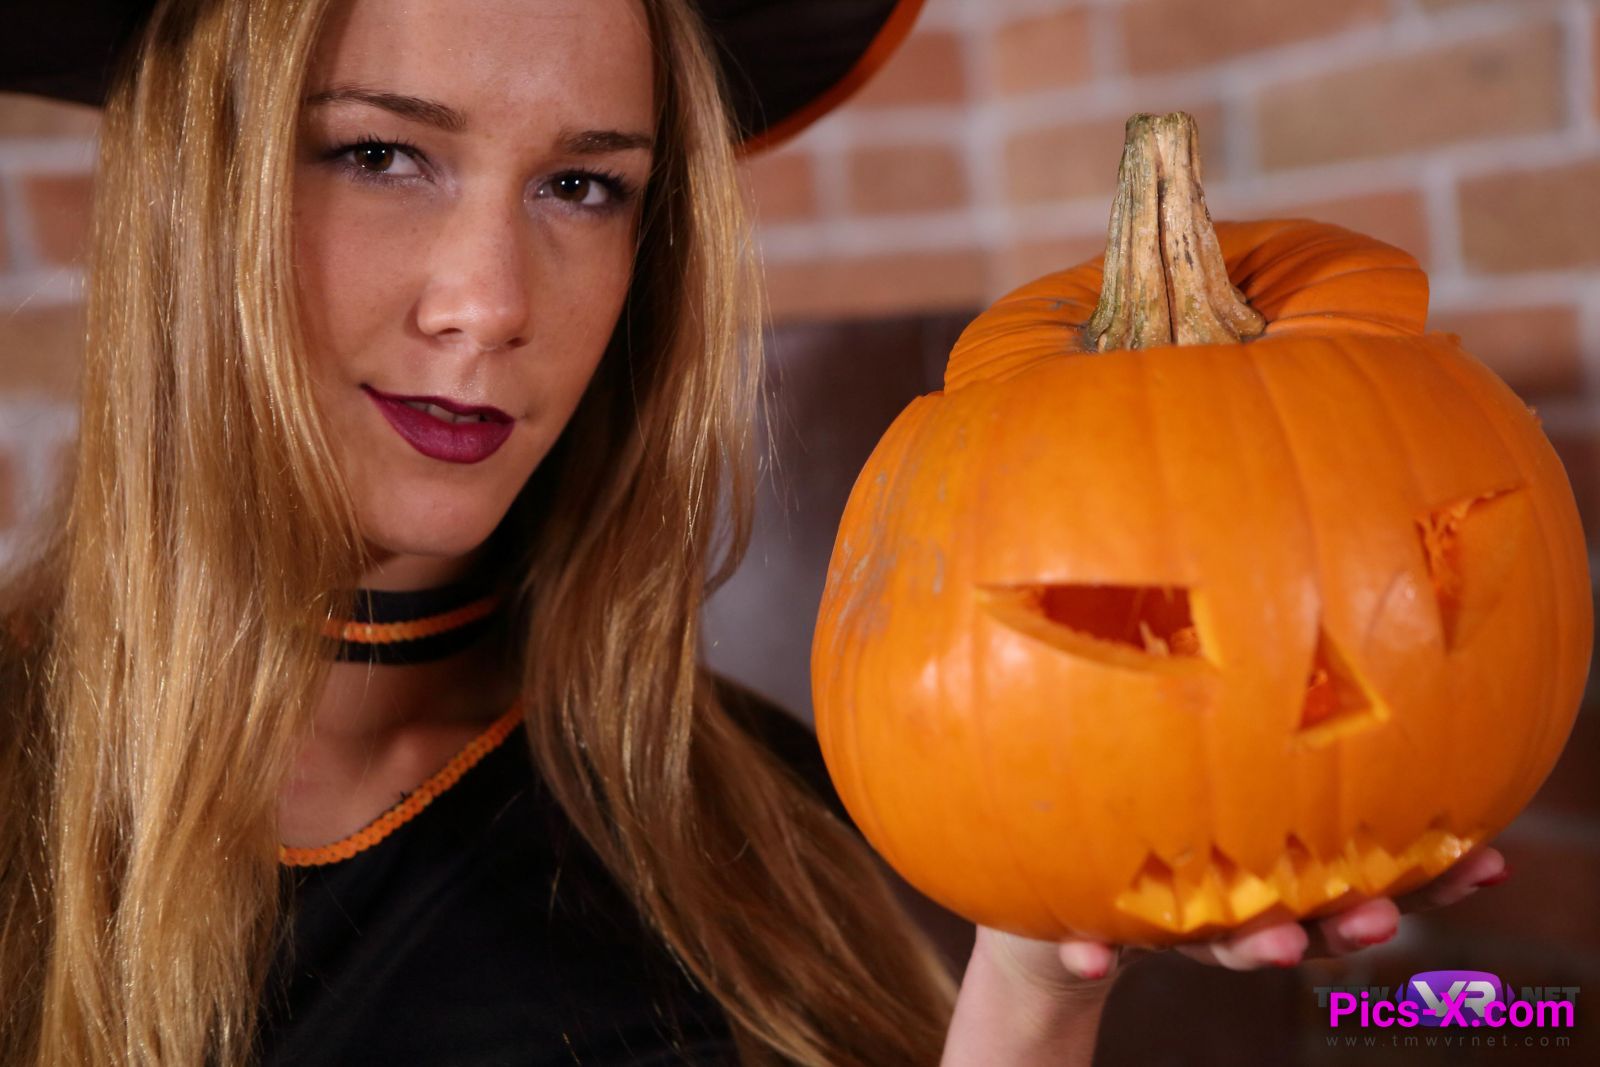 Naughty Minx Has Special Sex Treat for Halloween - TmwVRnet.com - Image 34